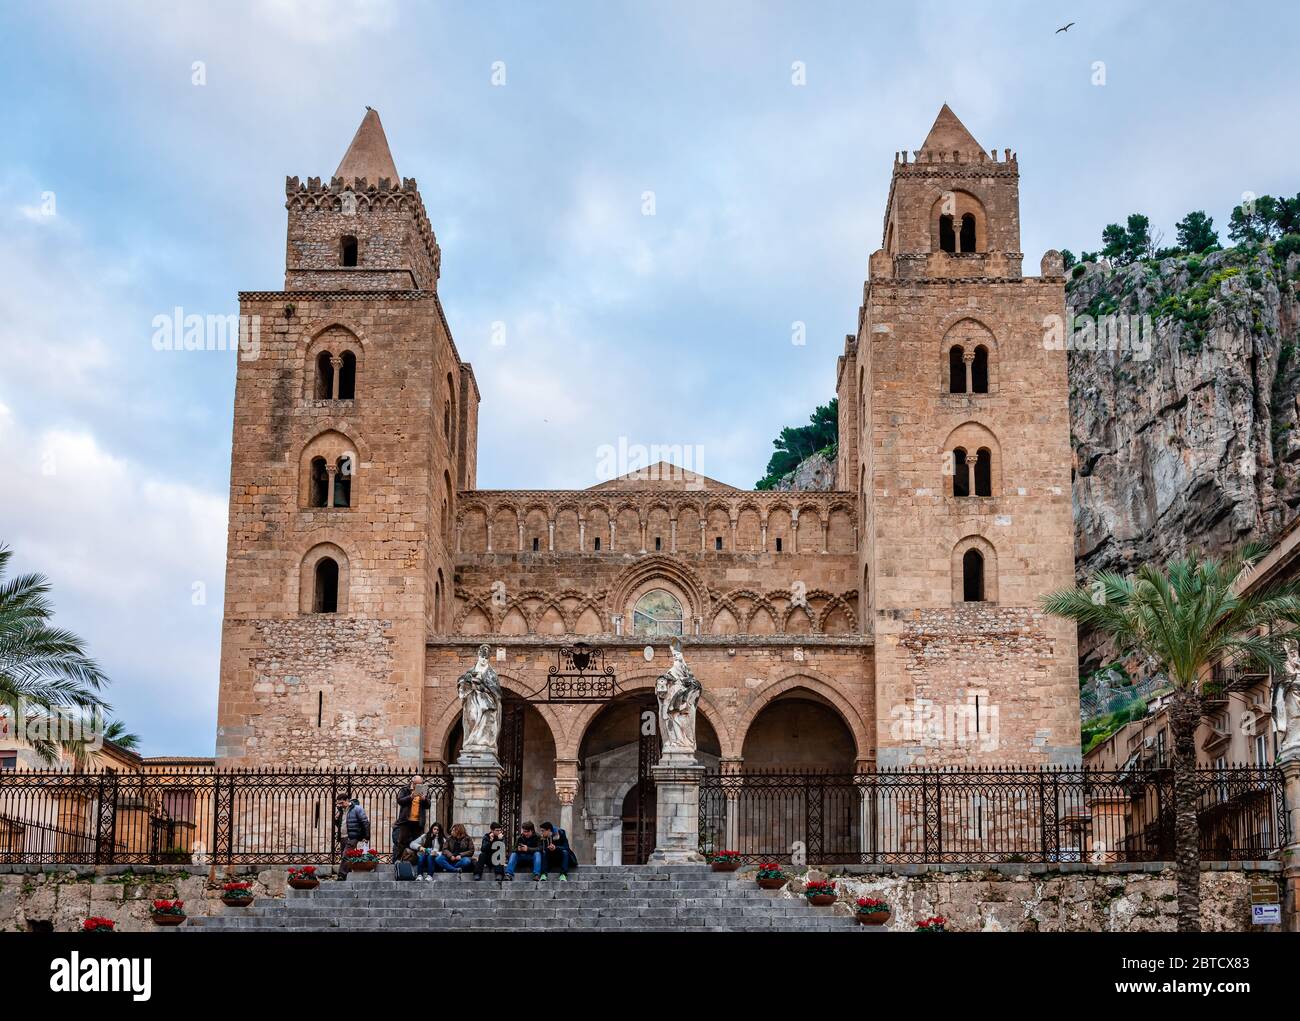 Cefalu / Italy - December 29 2015: The Cathedral of the town, erected between 1131 and 1240 in the Norman architectural style, in the island of Sicily Stock Photo